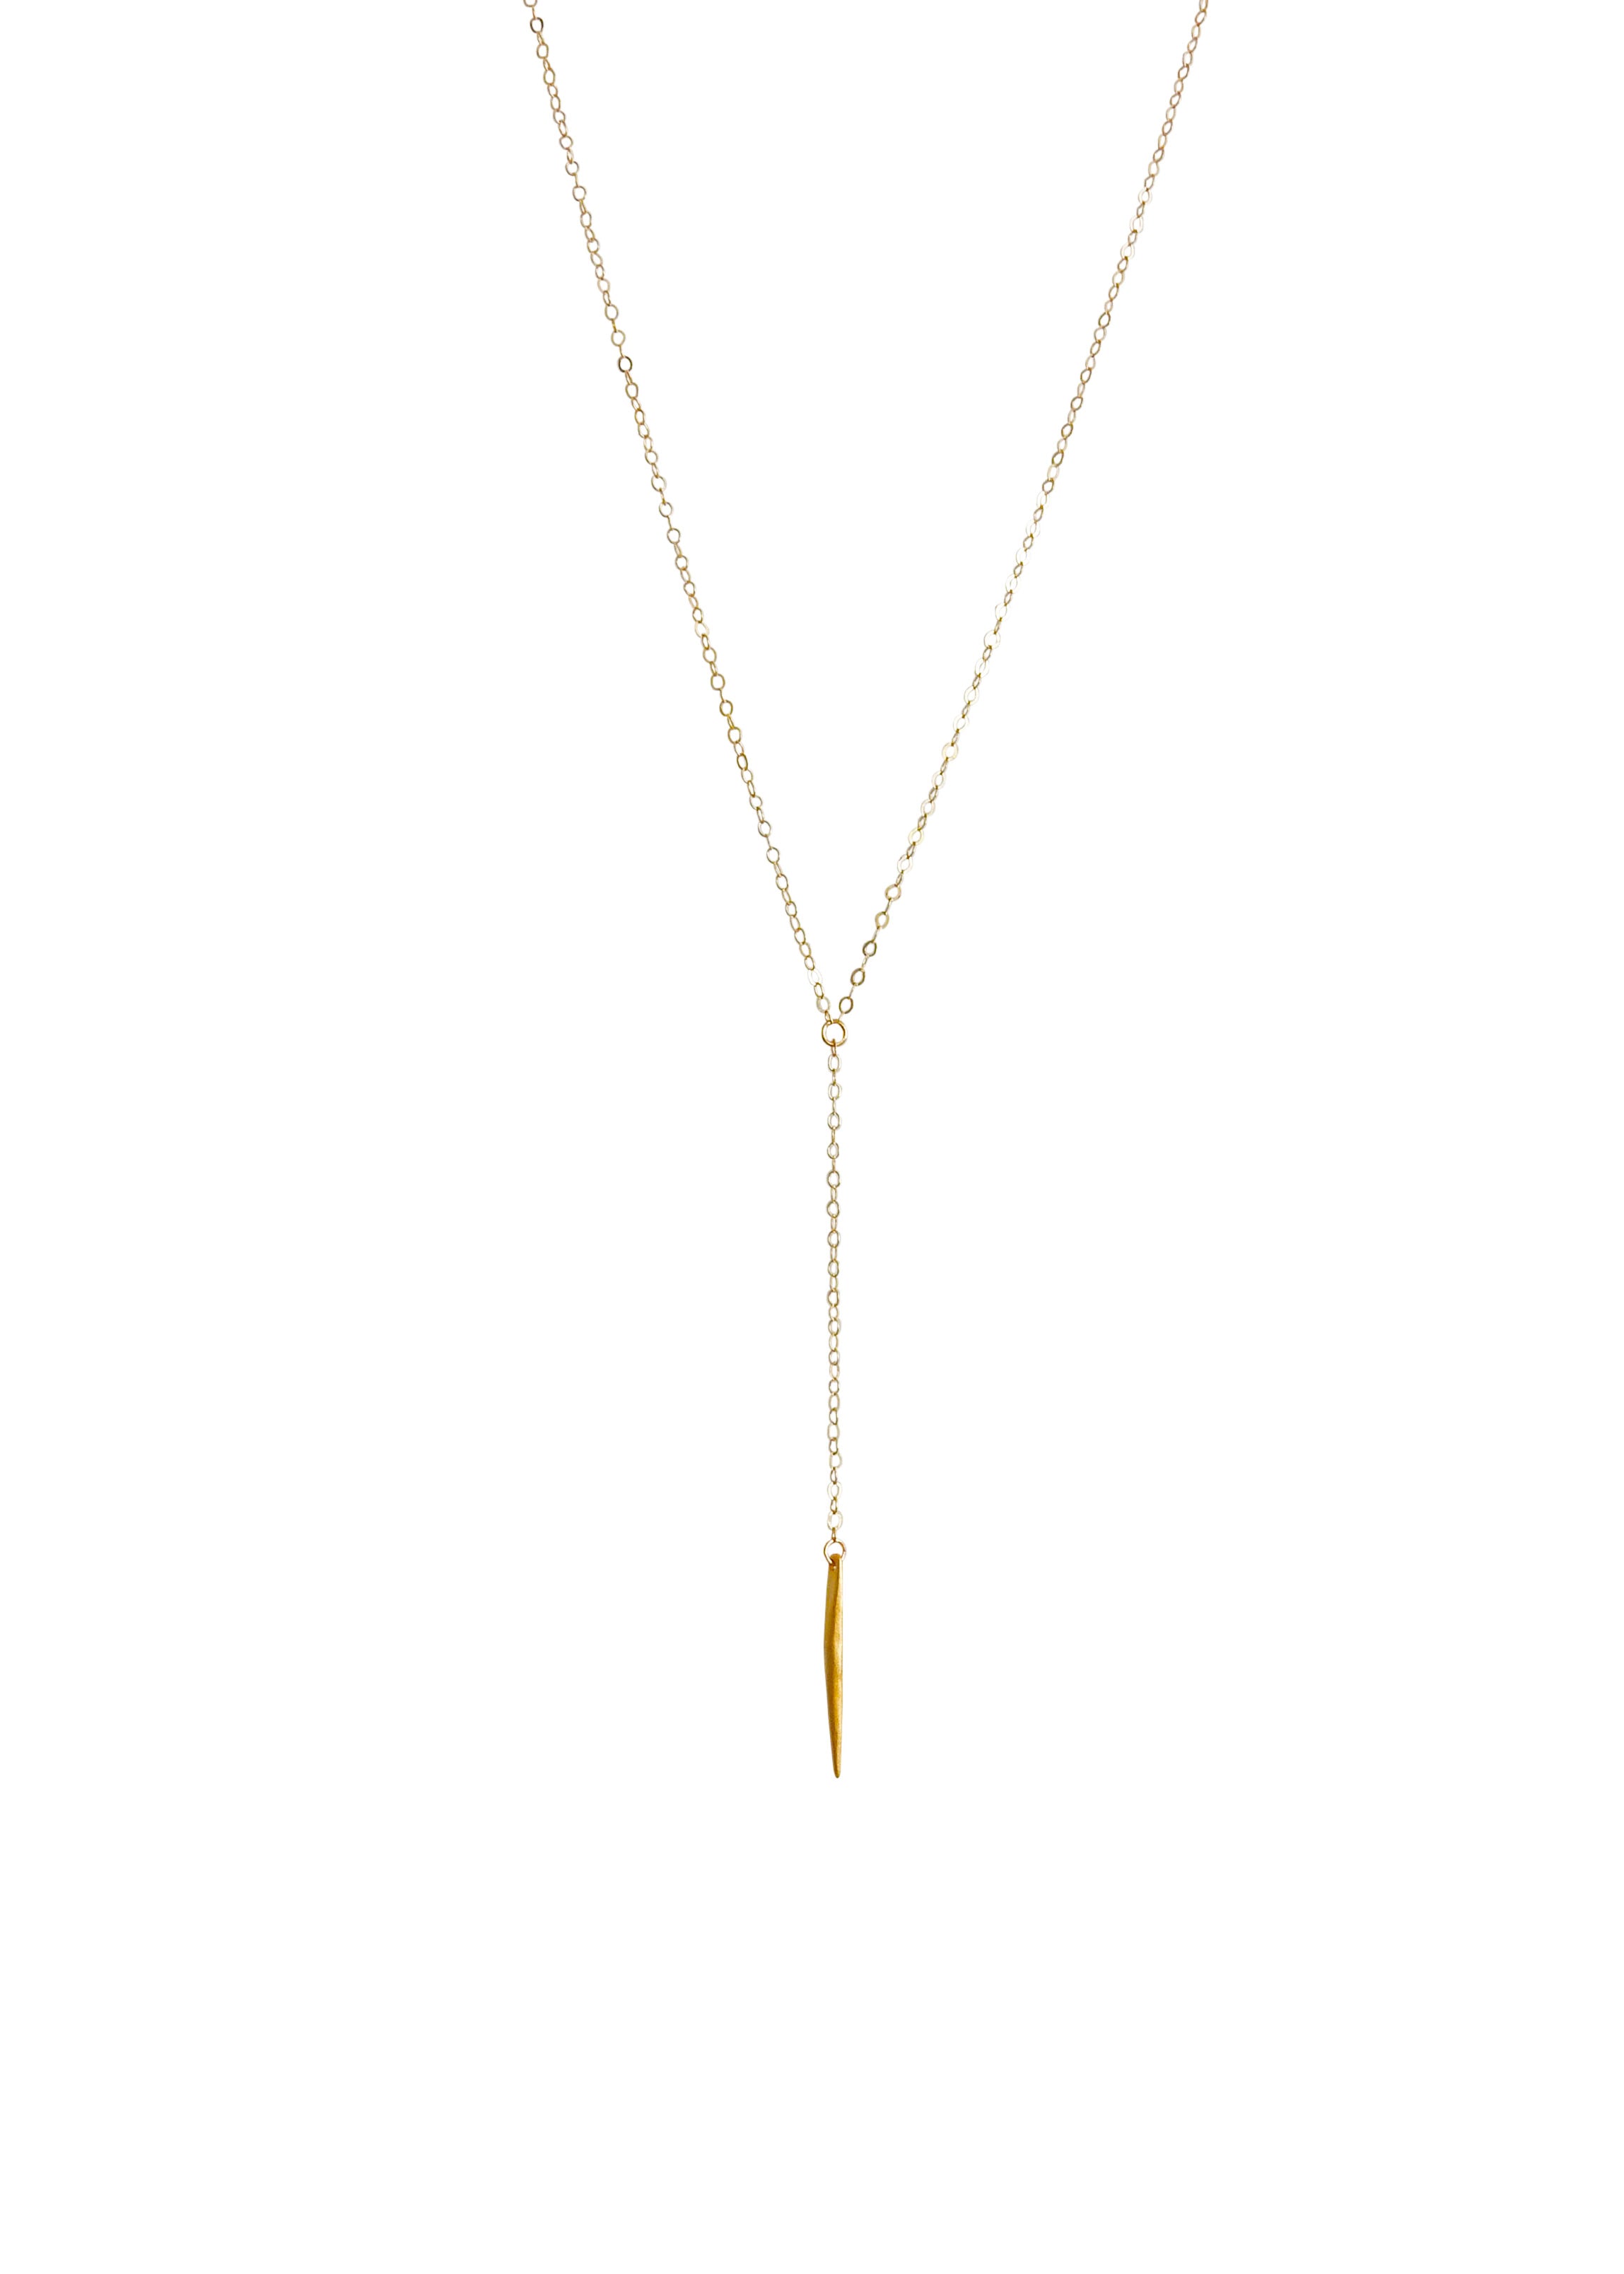 Delicate Gold Lariat RiRi Necklace Apostle In House Collection